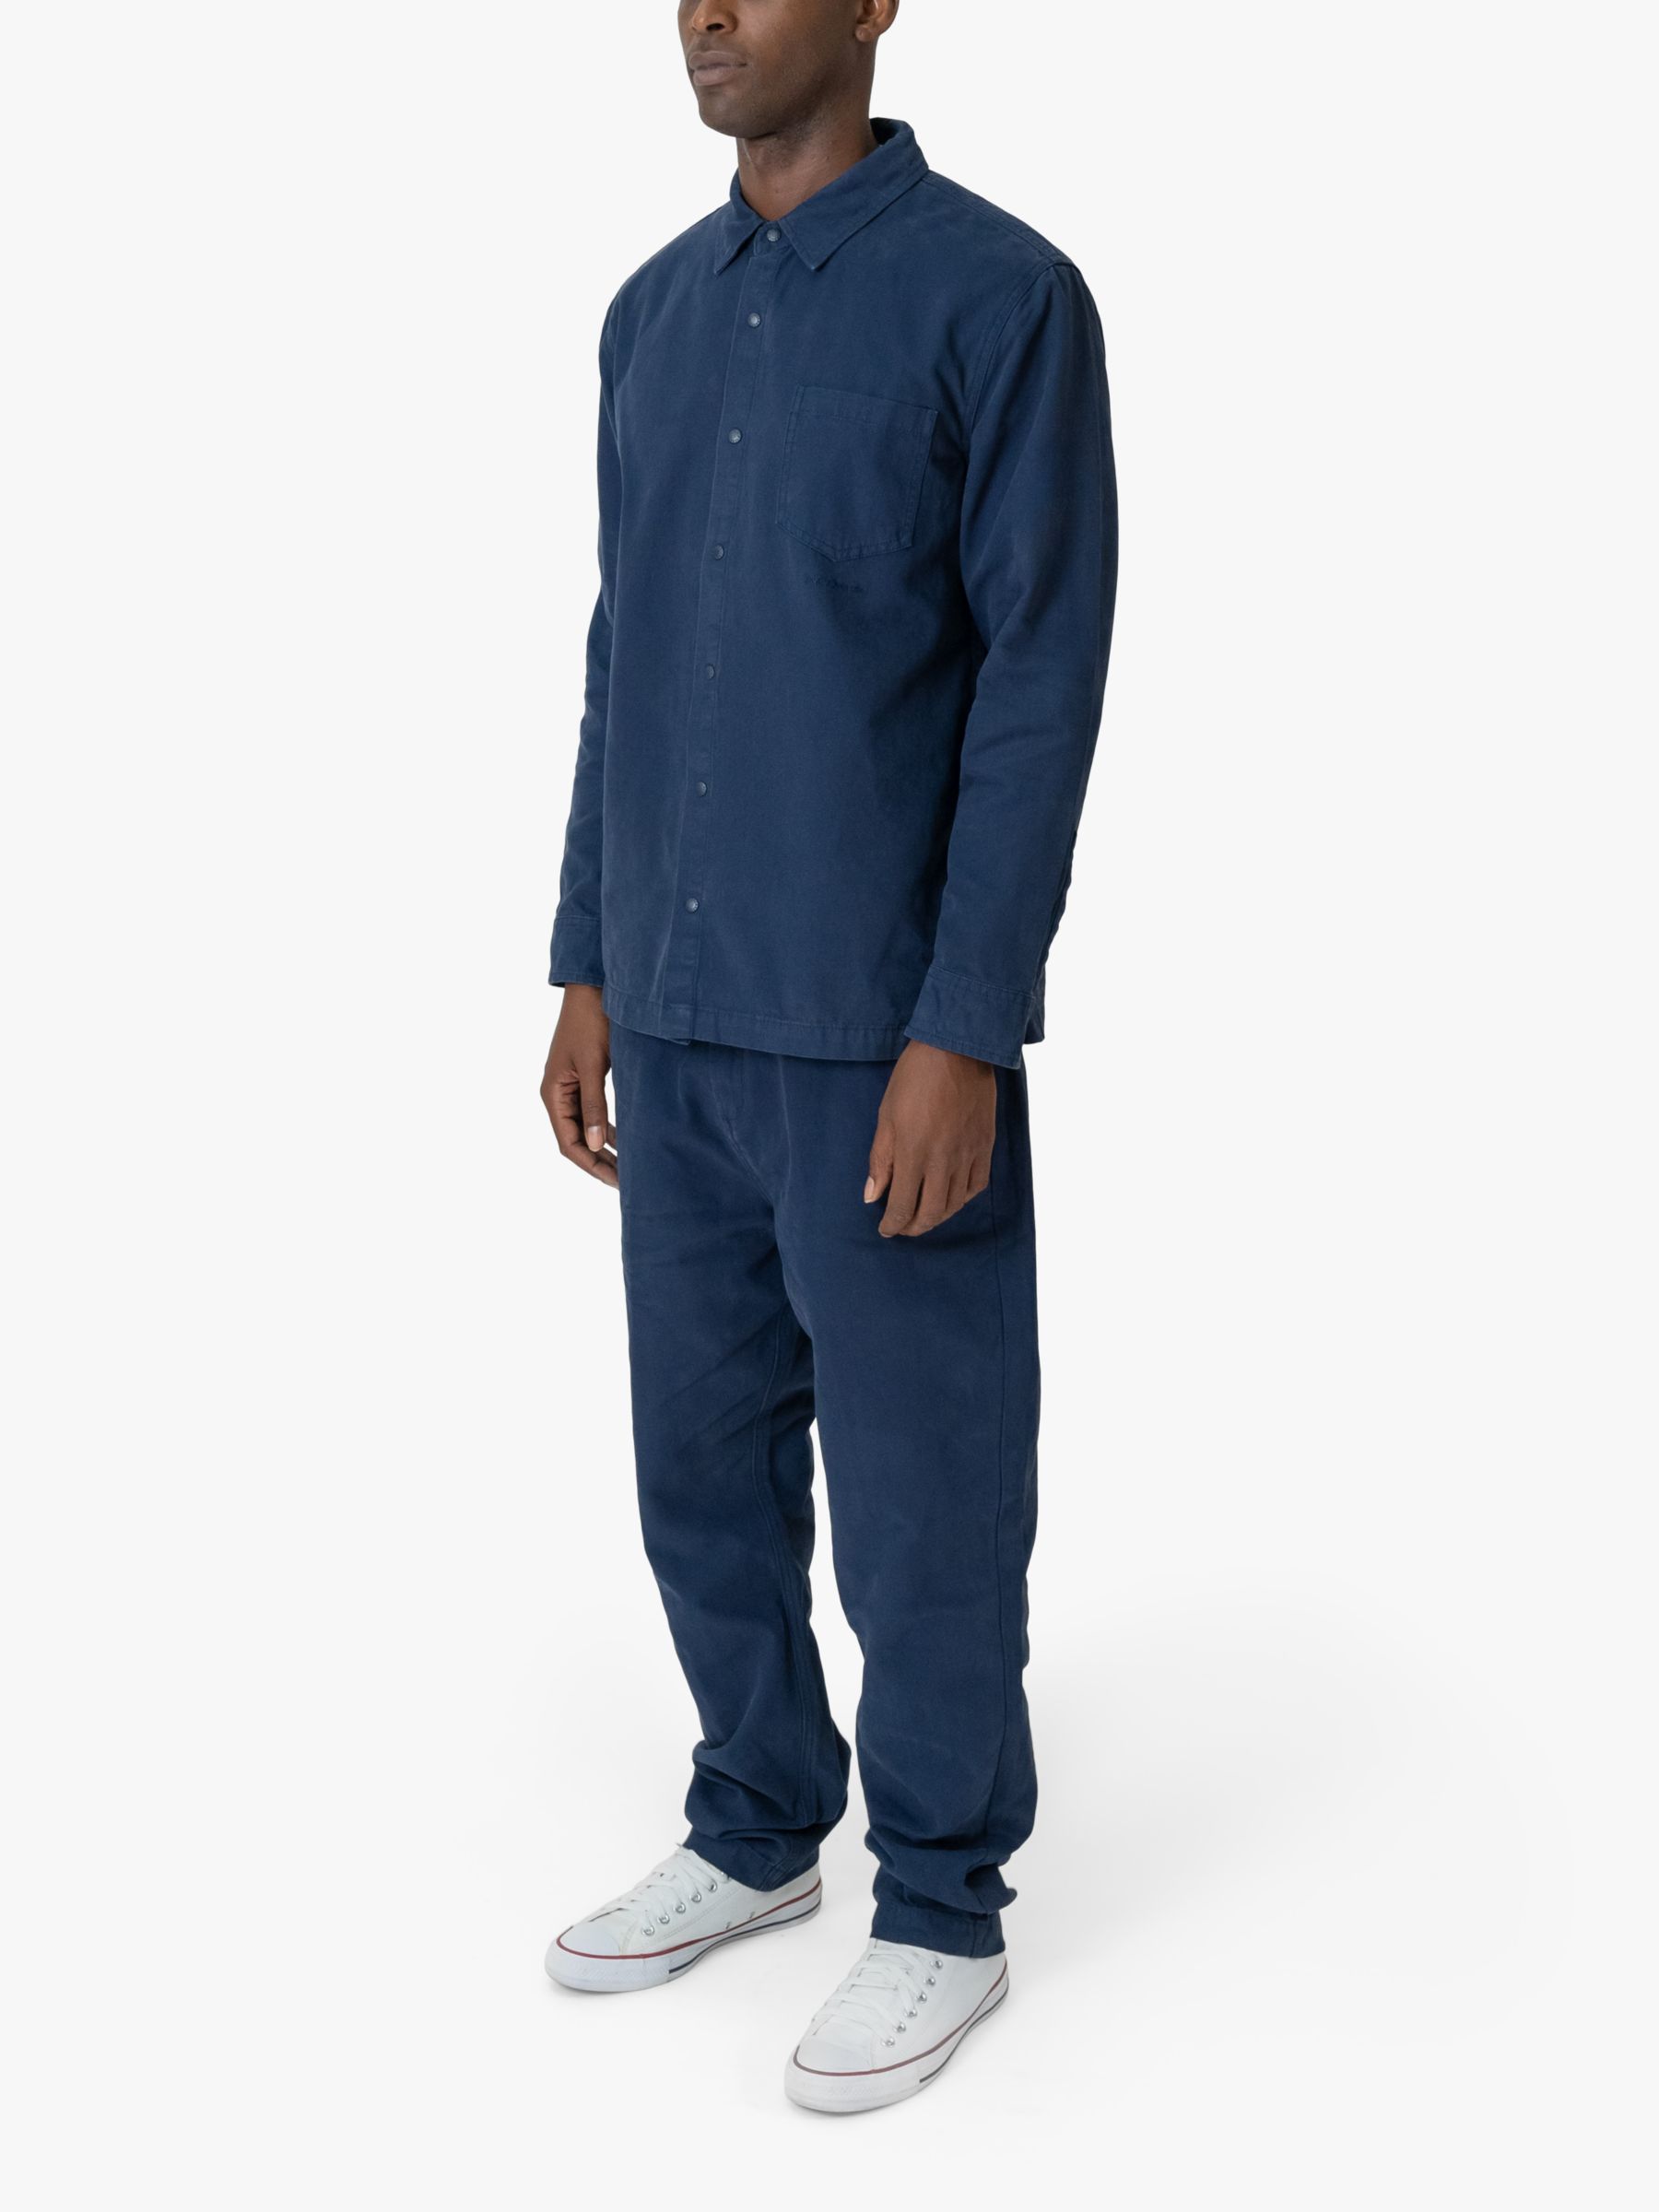 M.C.Overalls Relaxed Fit Cotton Canvas Trousers, Navy, W26/L32